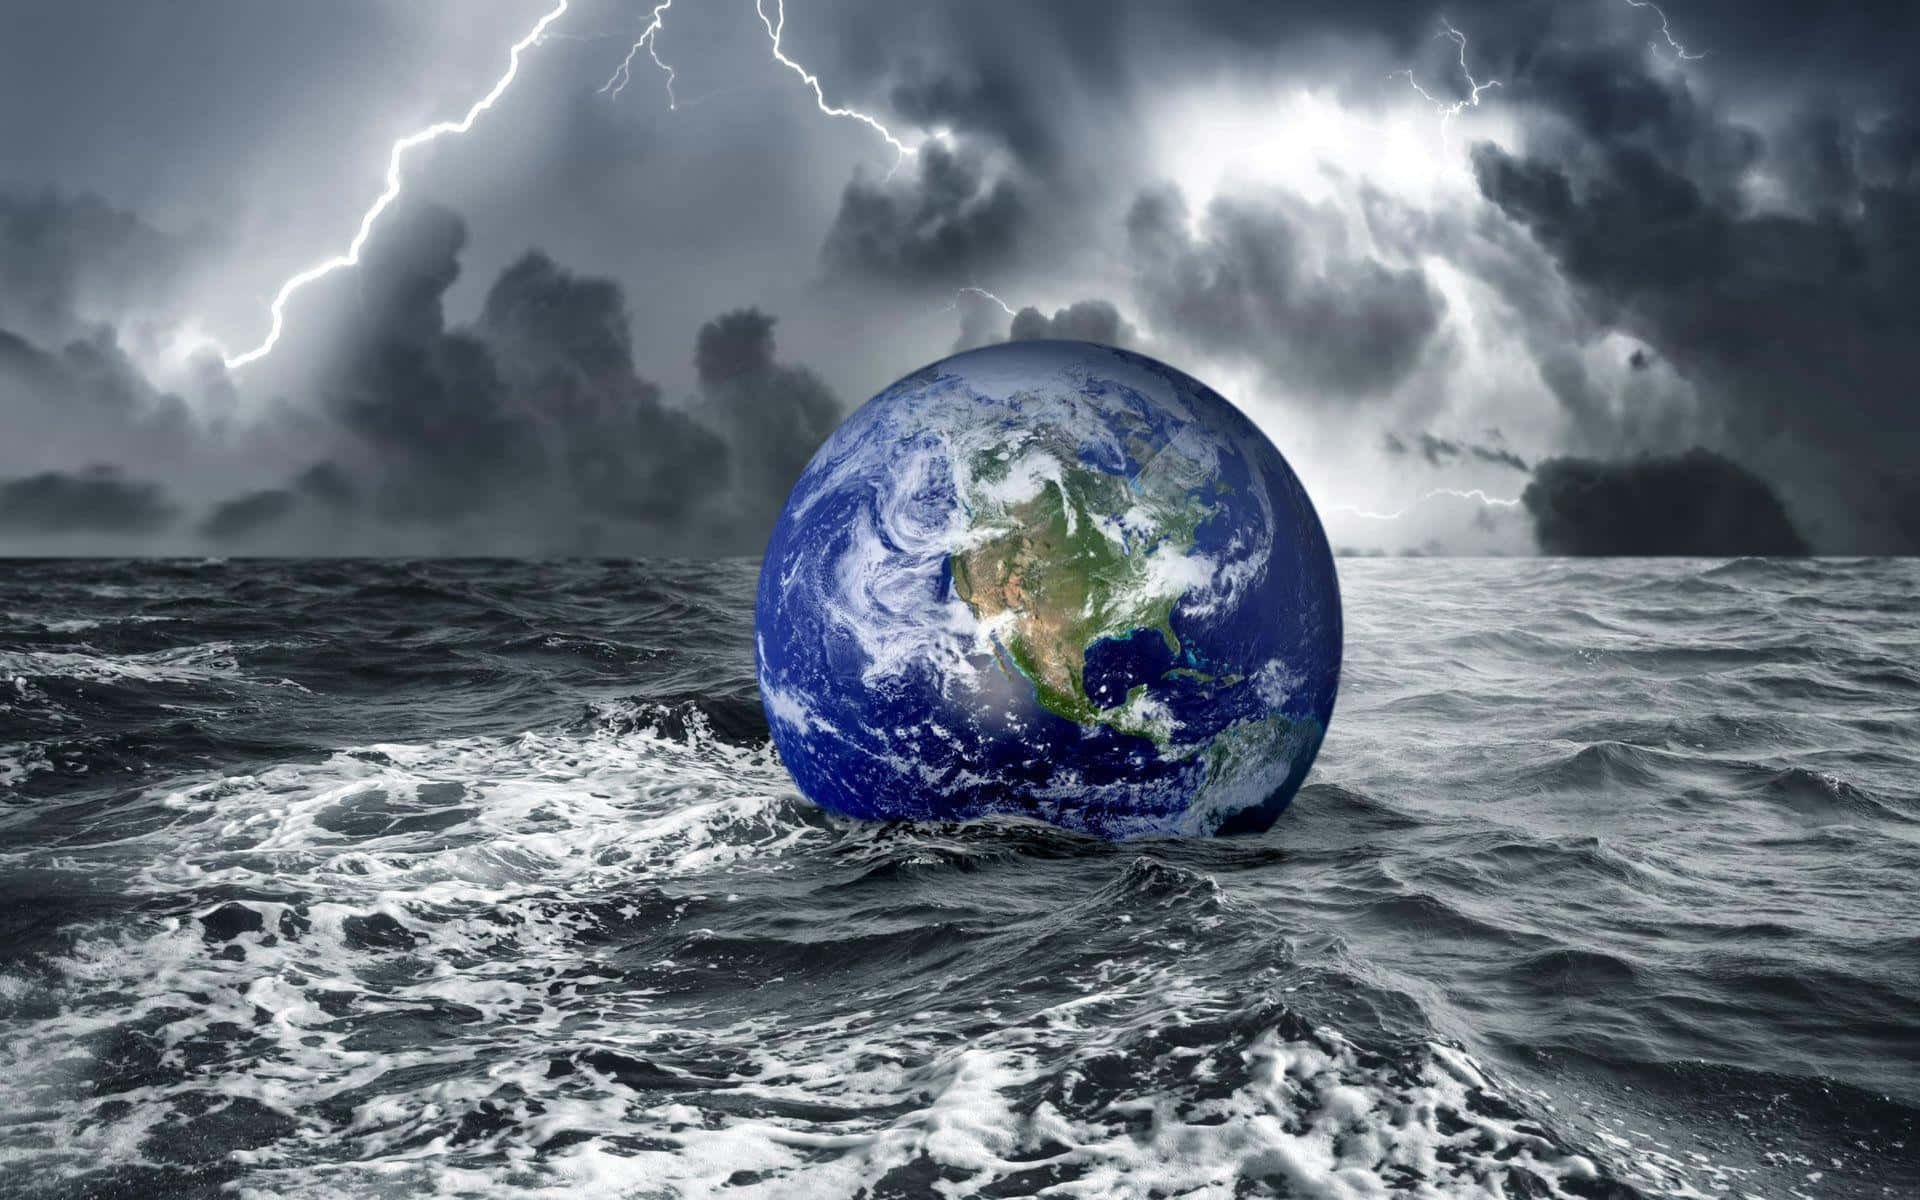 Flood And Storm In Planet Earth Digital Art Wallpaper